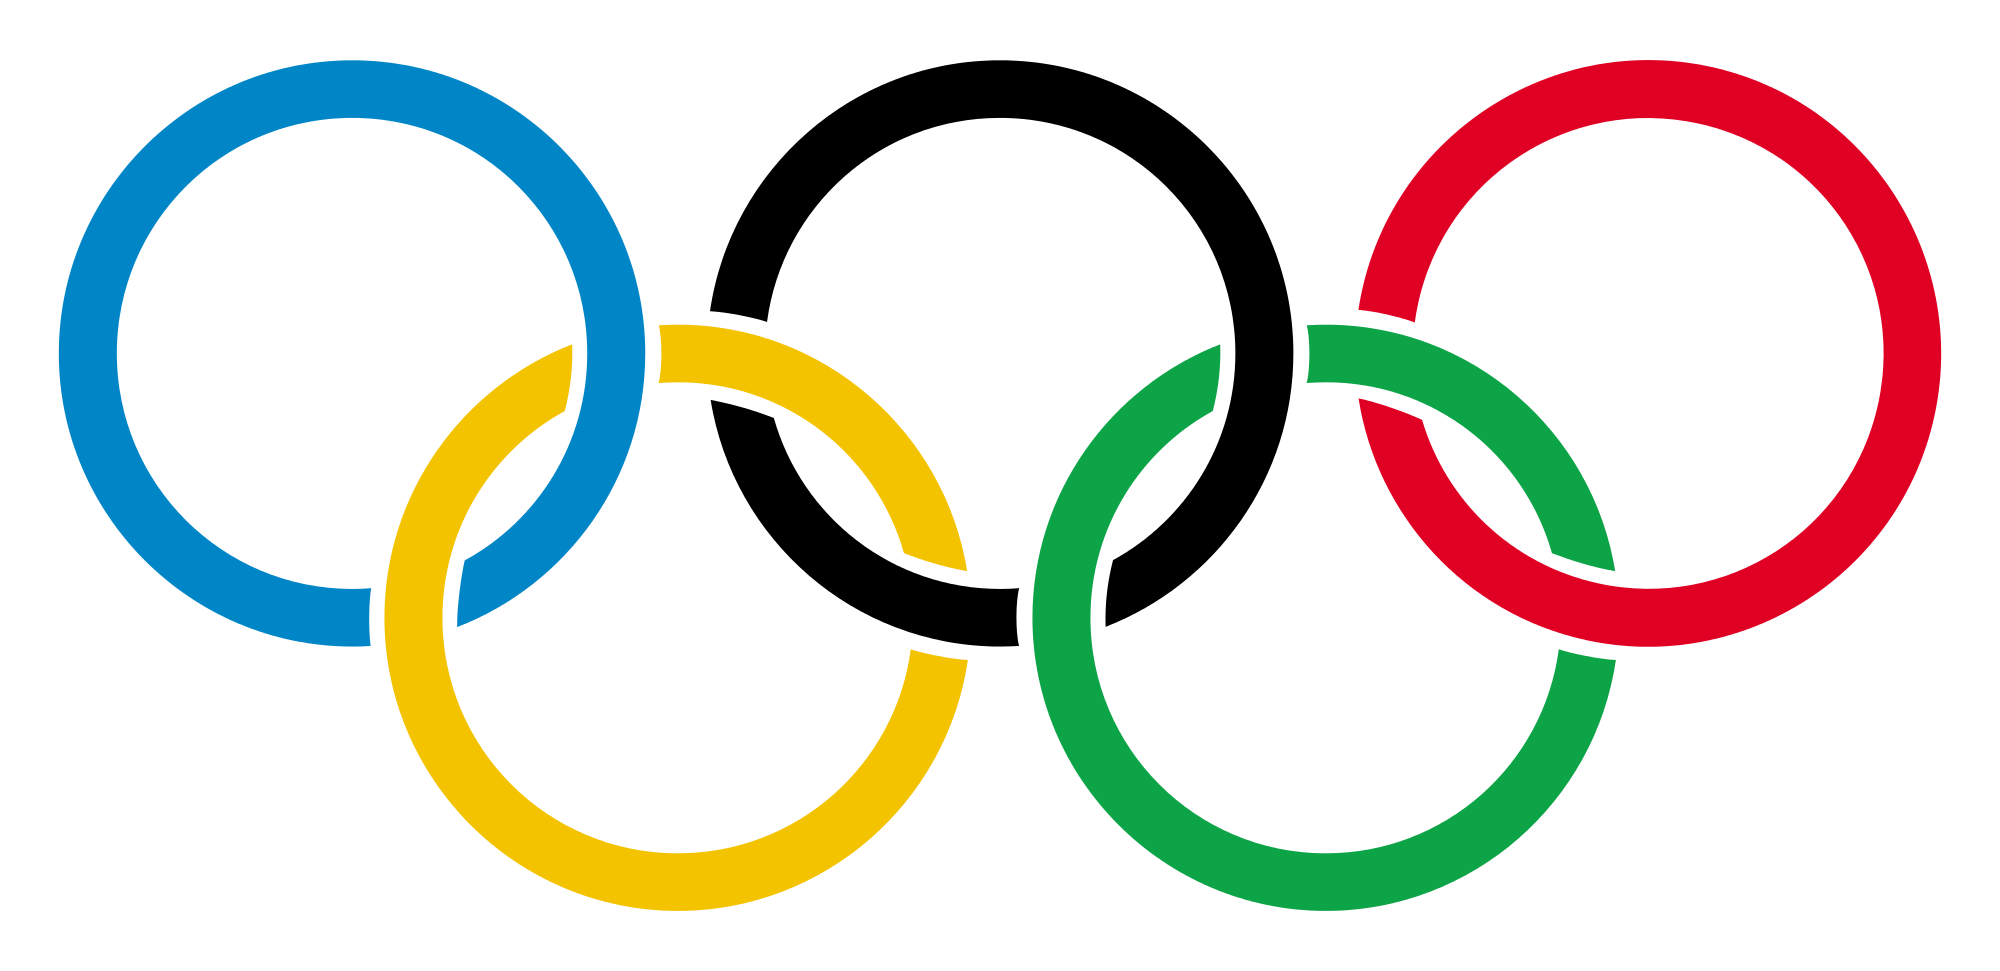 Olympic Rings Transparent Background 3 - Olympic Rings, Transparent background PNG HD thumbnail